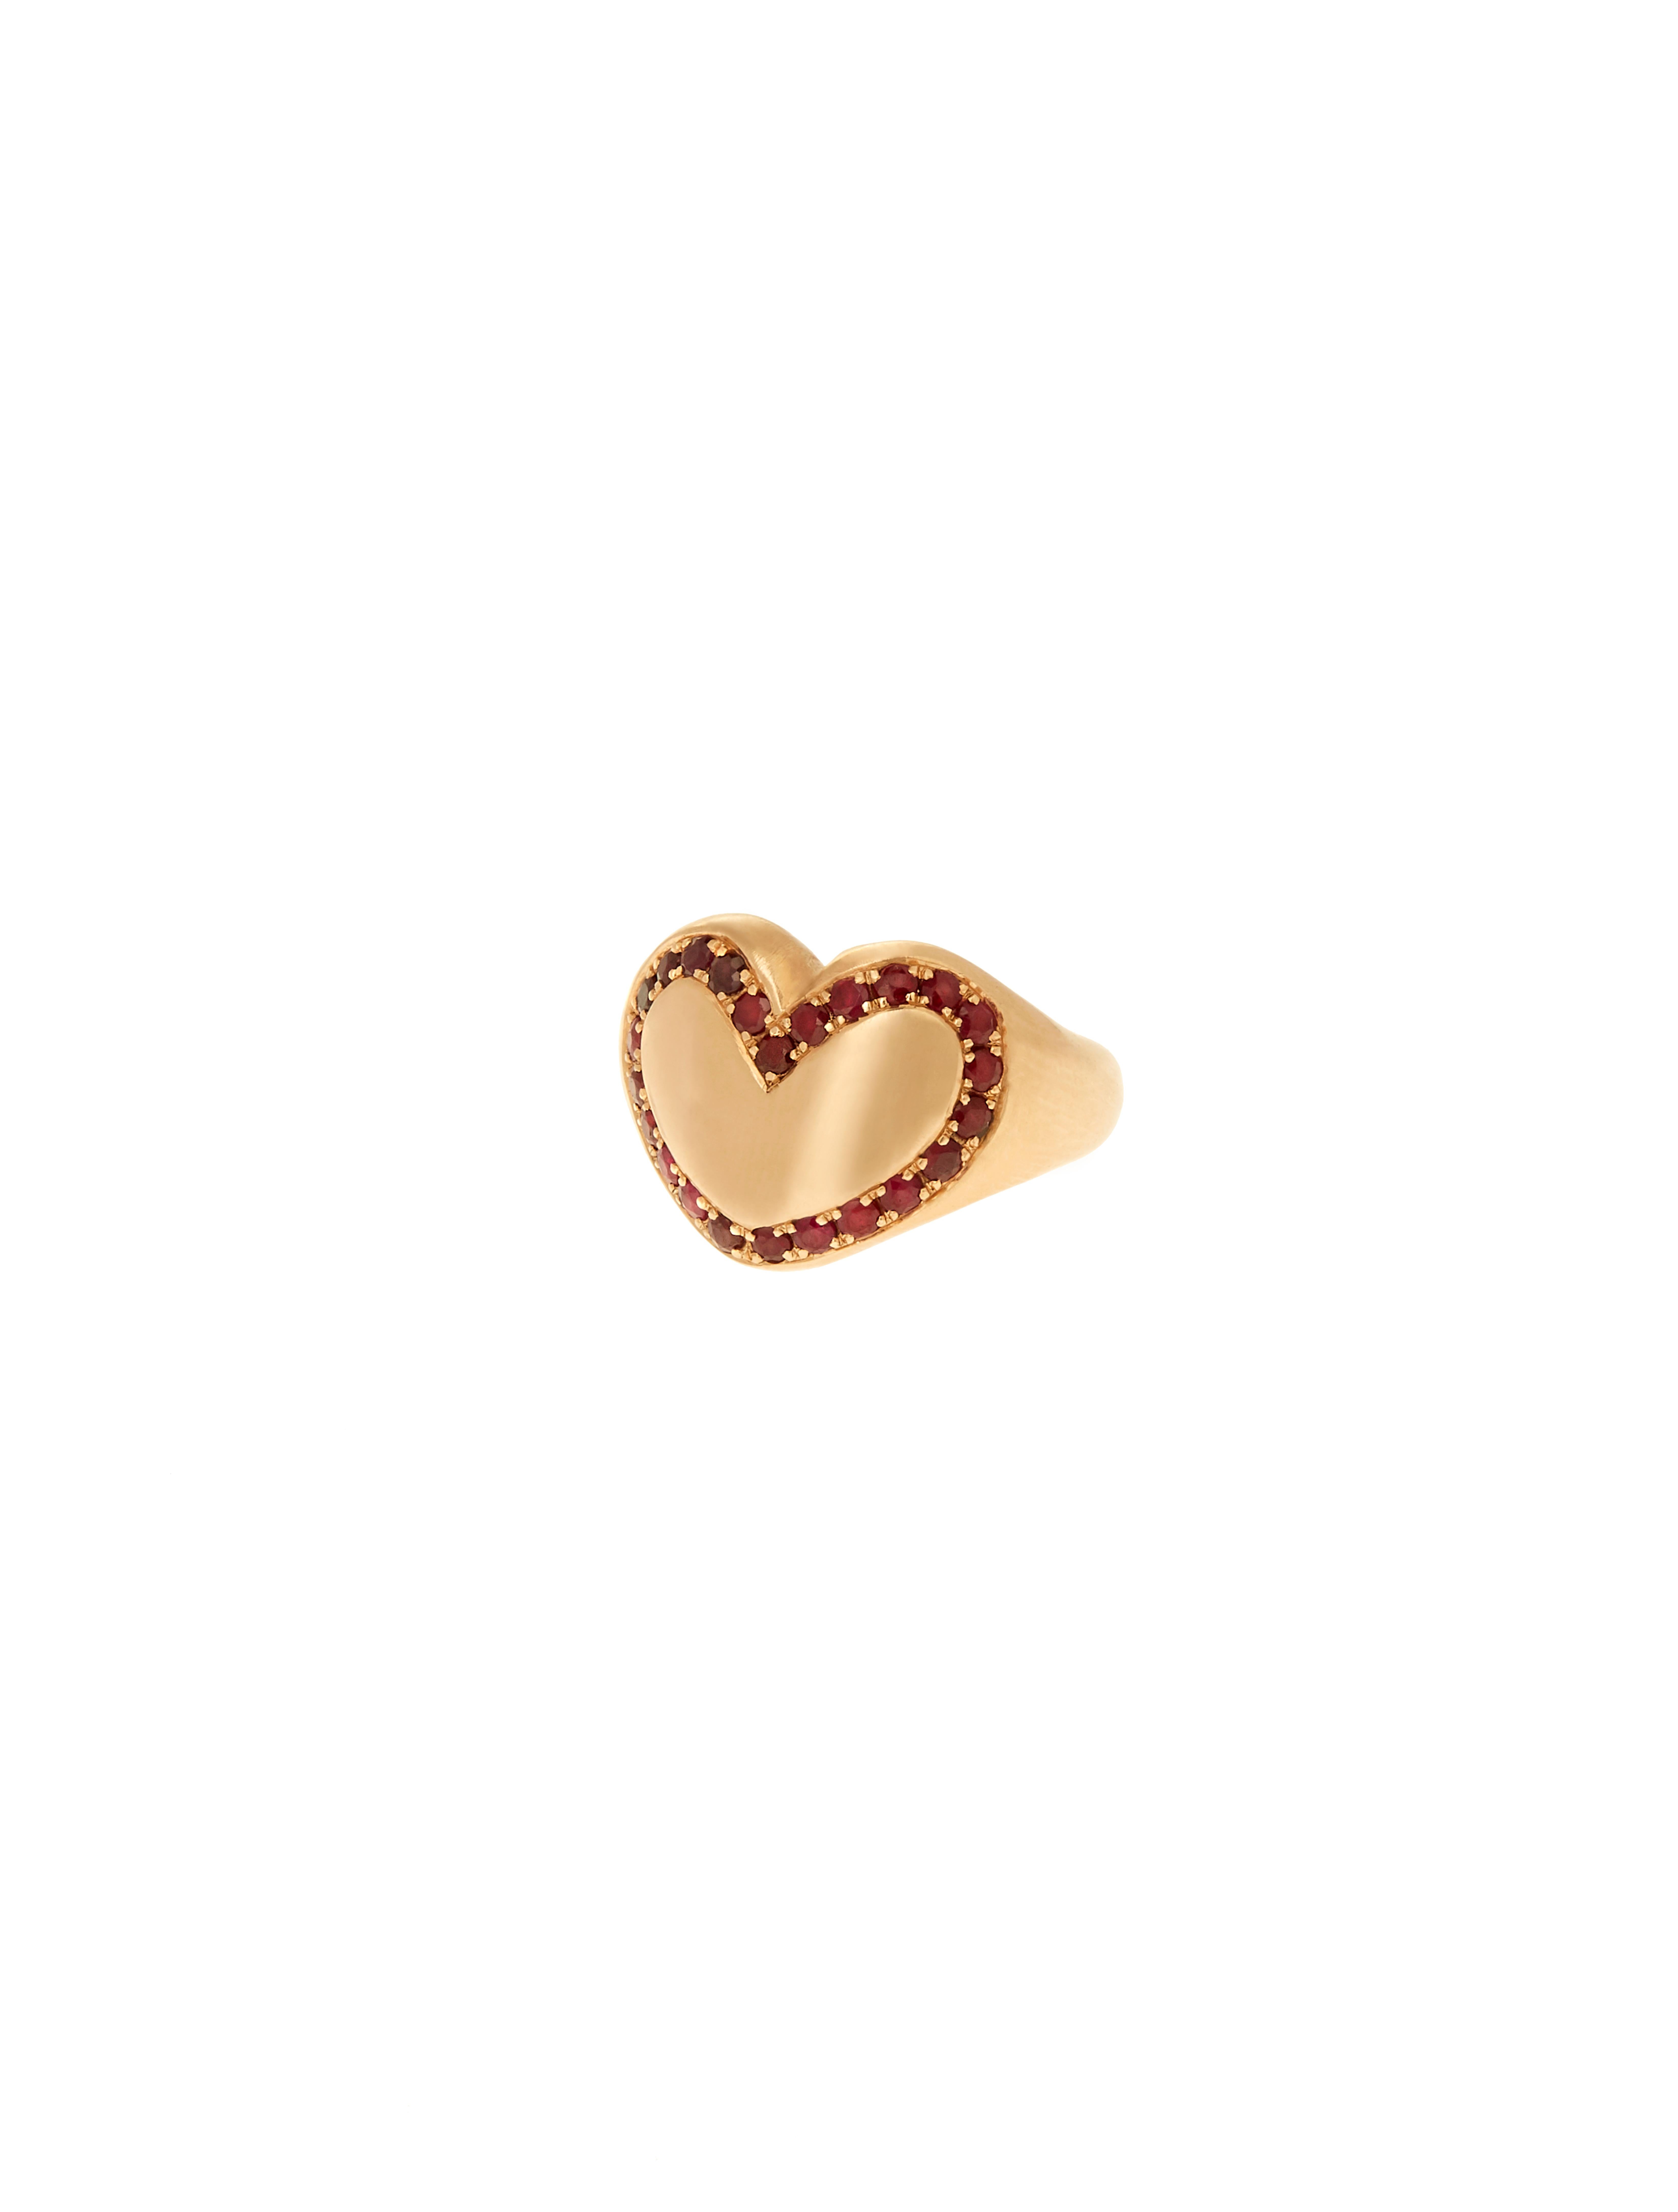 Heart diamond ring designed by Christina Alexiou. 
The heart diamond ring is crafted with 18k yellow gold and made in Greece. It has 0.38ct diamonds. This piece features the element of the heart redefined in a contemporary everyday cocktail ring